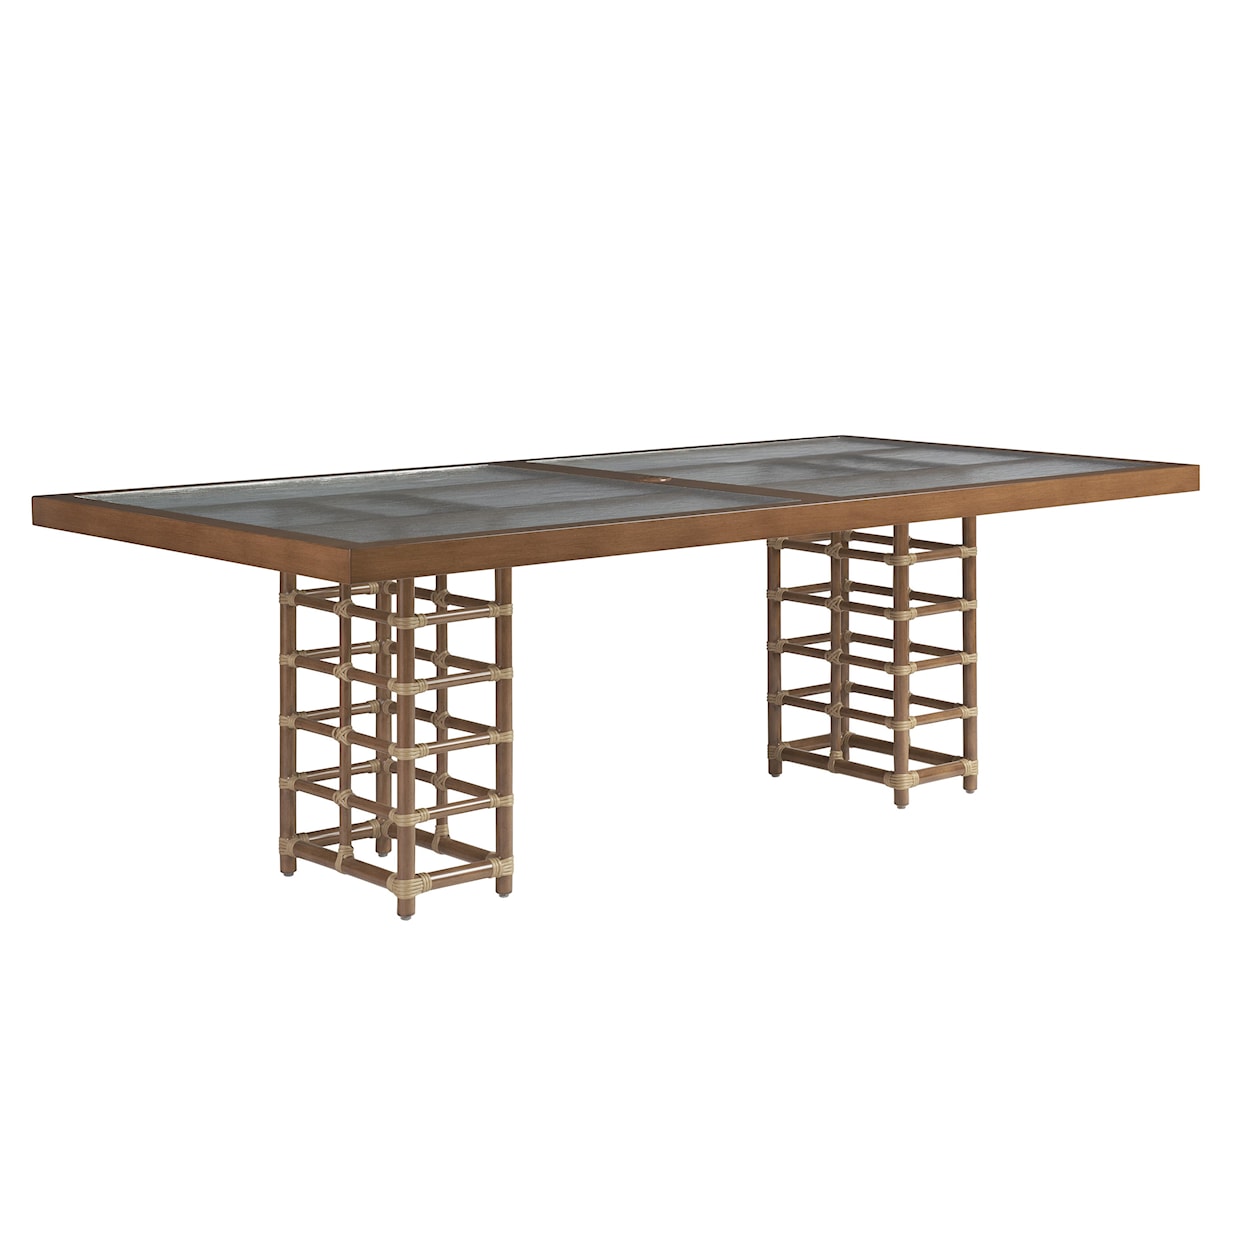 Tommy Bahama Outdoor Living Sandpiper Bay Outdoor Rectangular Dining Table